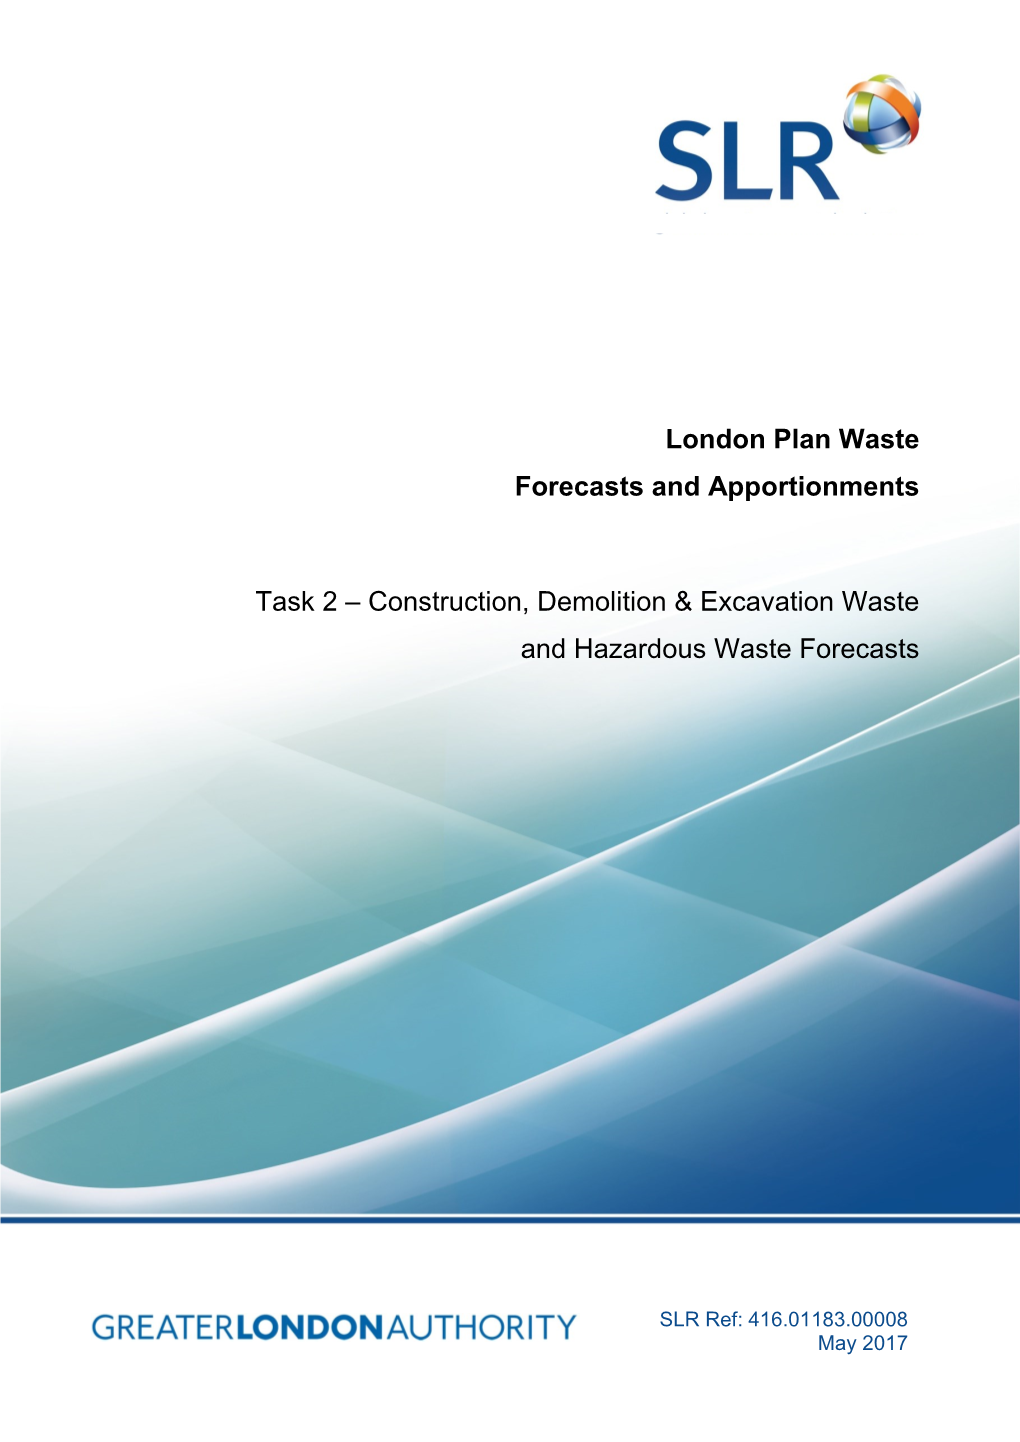 London Plan Waste Forecasts and Apportionments Task 2